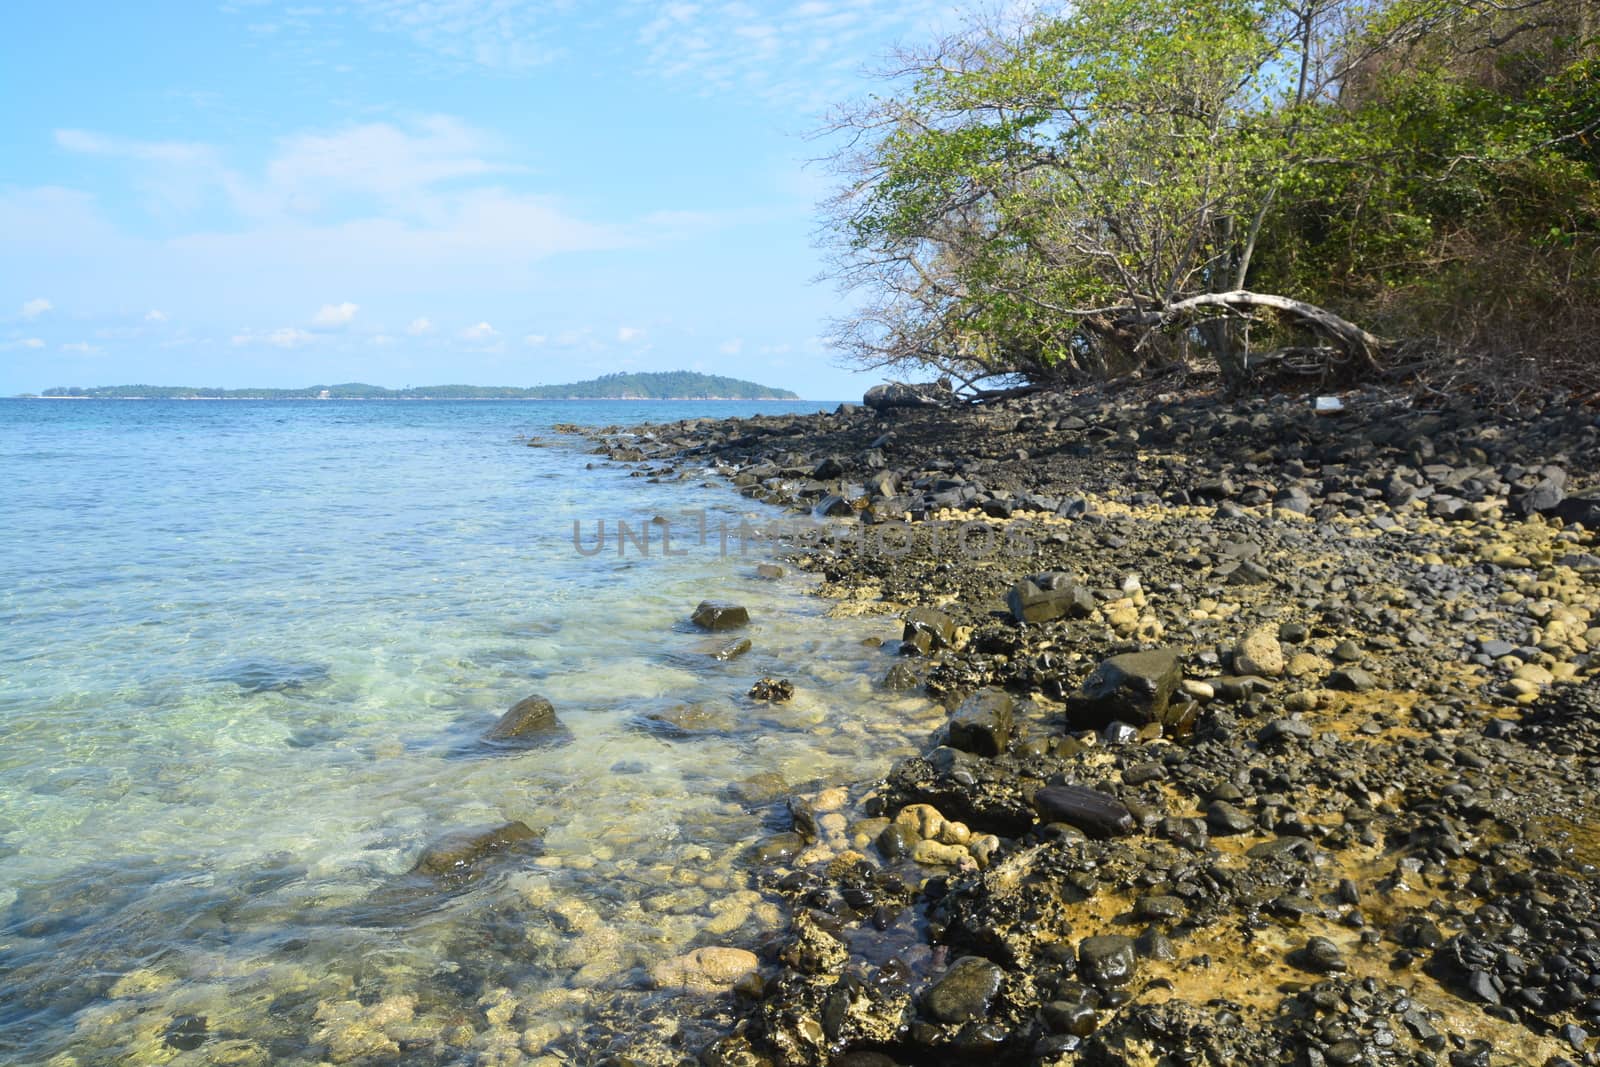 Koh Hin Ngam  is a unique small island unlike other island. It's covered with small black rocks in Tarutao Marine National Park in Satun Province, Thailand